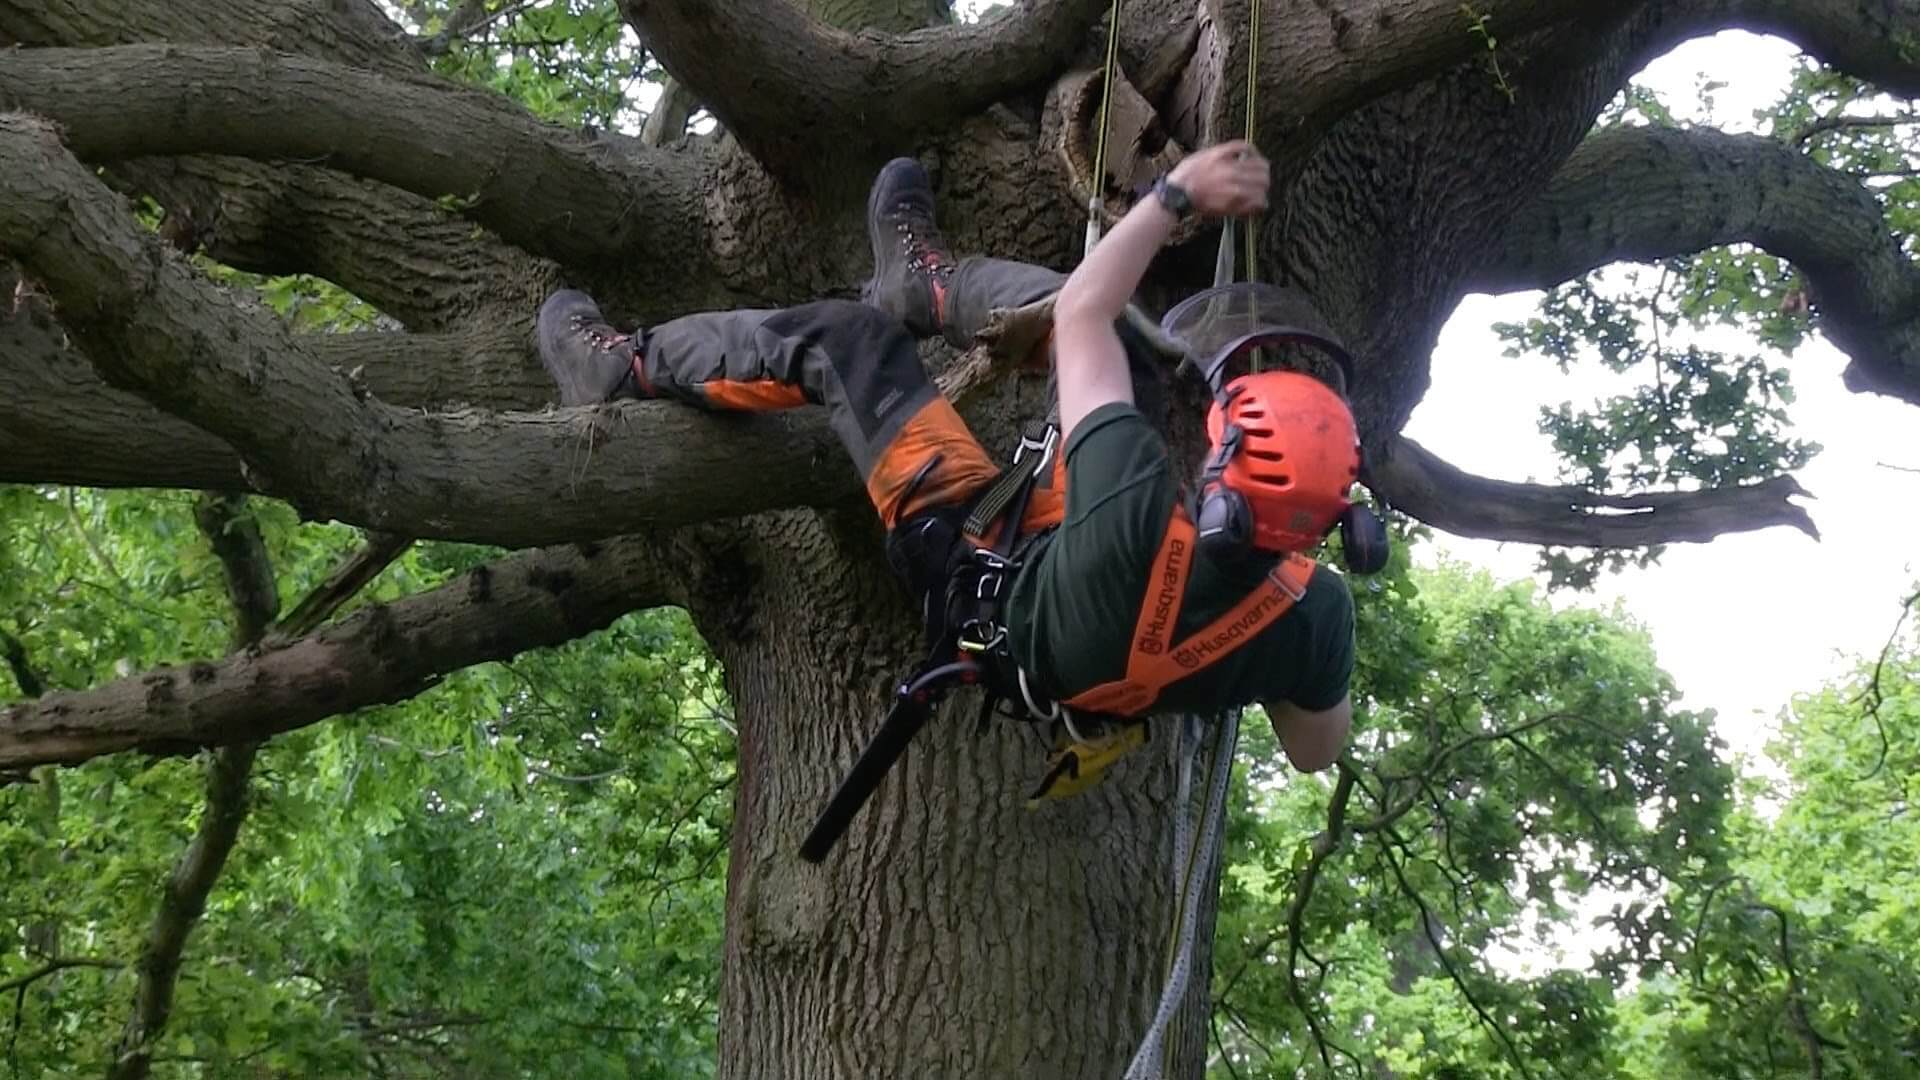 Arborist Consultations-Palm Beach Island Tree Trimming and Tree Removal Services-We Offer Tree Trimming Services, Tree Removal, Tree Pruning, Tree Cutting, Residential and Commercial Tree Trimming Services, Storm Damage, Emergency Tree Removal, Land Clearing, Tree Companies, Tree Care Service, Stump Grinding, and we're the Best Tree Trimming Company Near You Guaranteed!